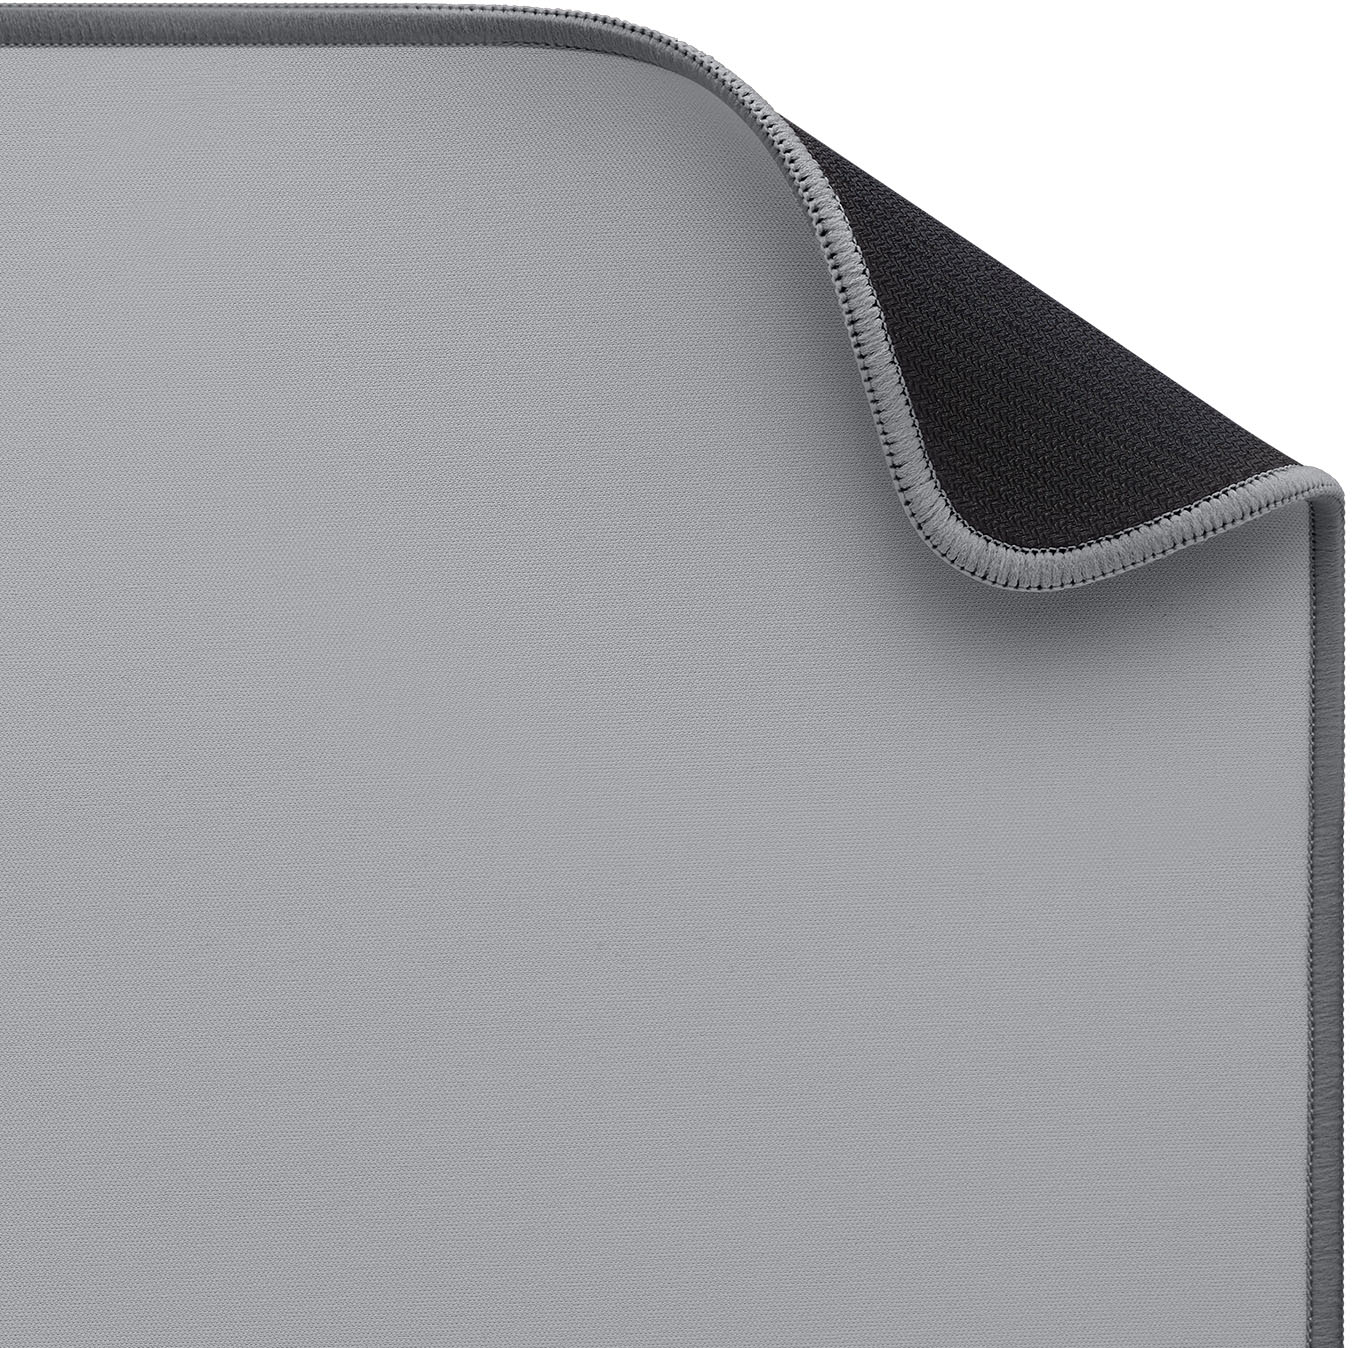 Logitech Desk Mat Studio Series Extended Mouse Pad with Spill-resistant  Durable Design (Large) Mid Gray 956-000047 - Best Buy